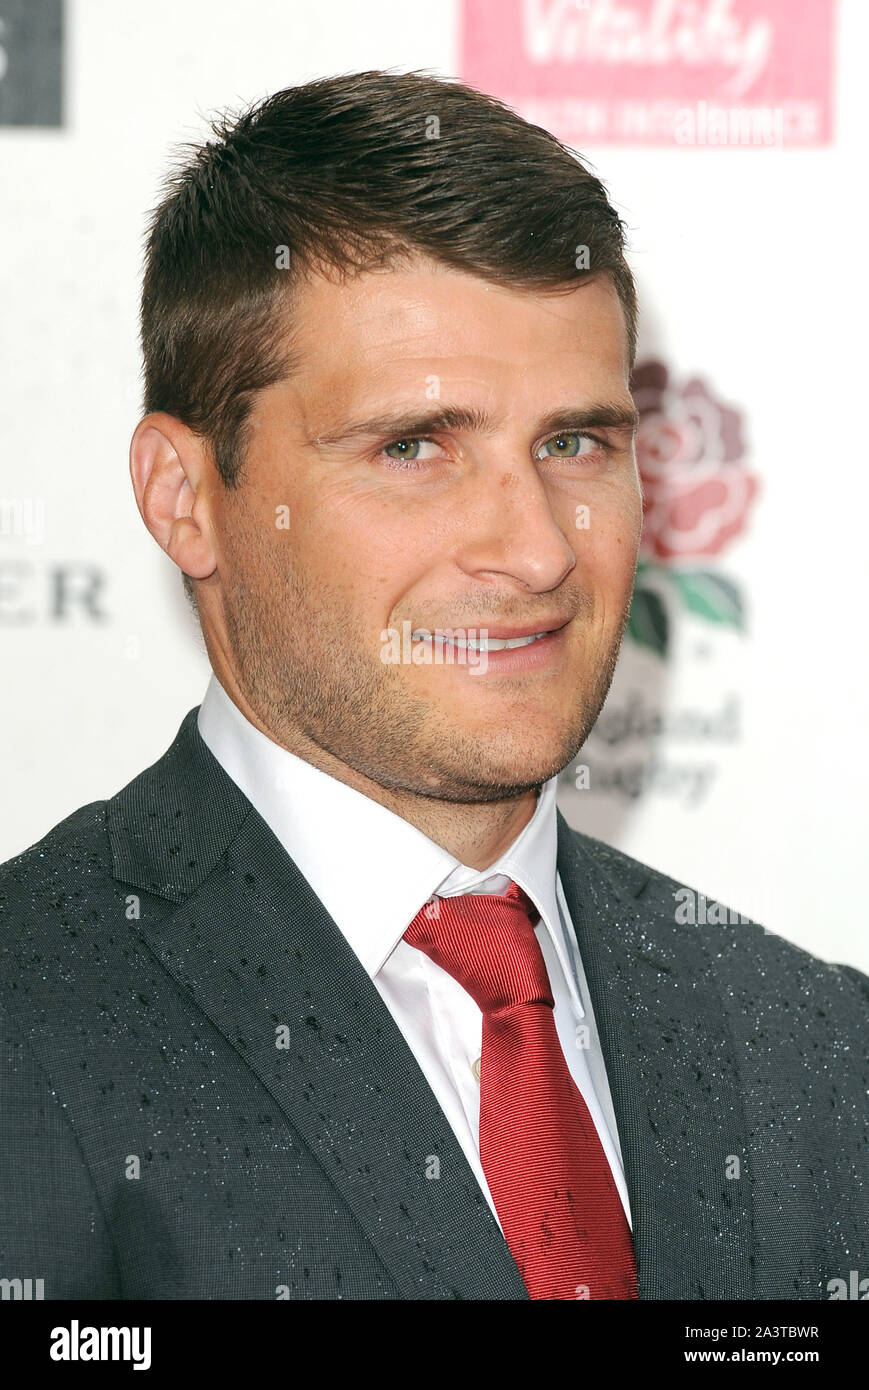 Photo Must Be Credited ©Jeff Spicer/Alpha Press 079852 05/08/2015 Richard Wigglesworth at the Carry Them Home Rugby Dinner held at Grosvenor House London Stock Photo